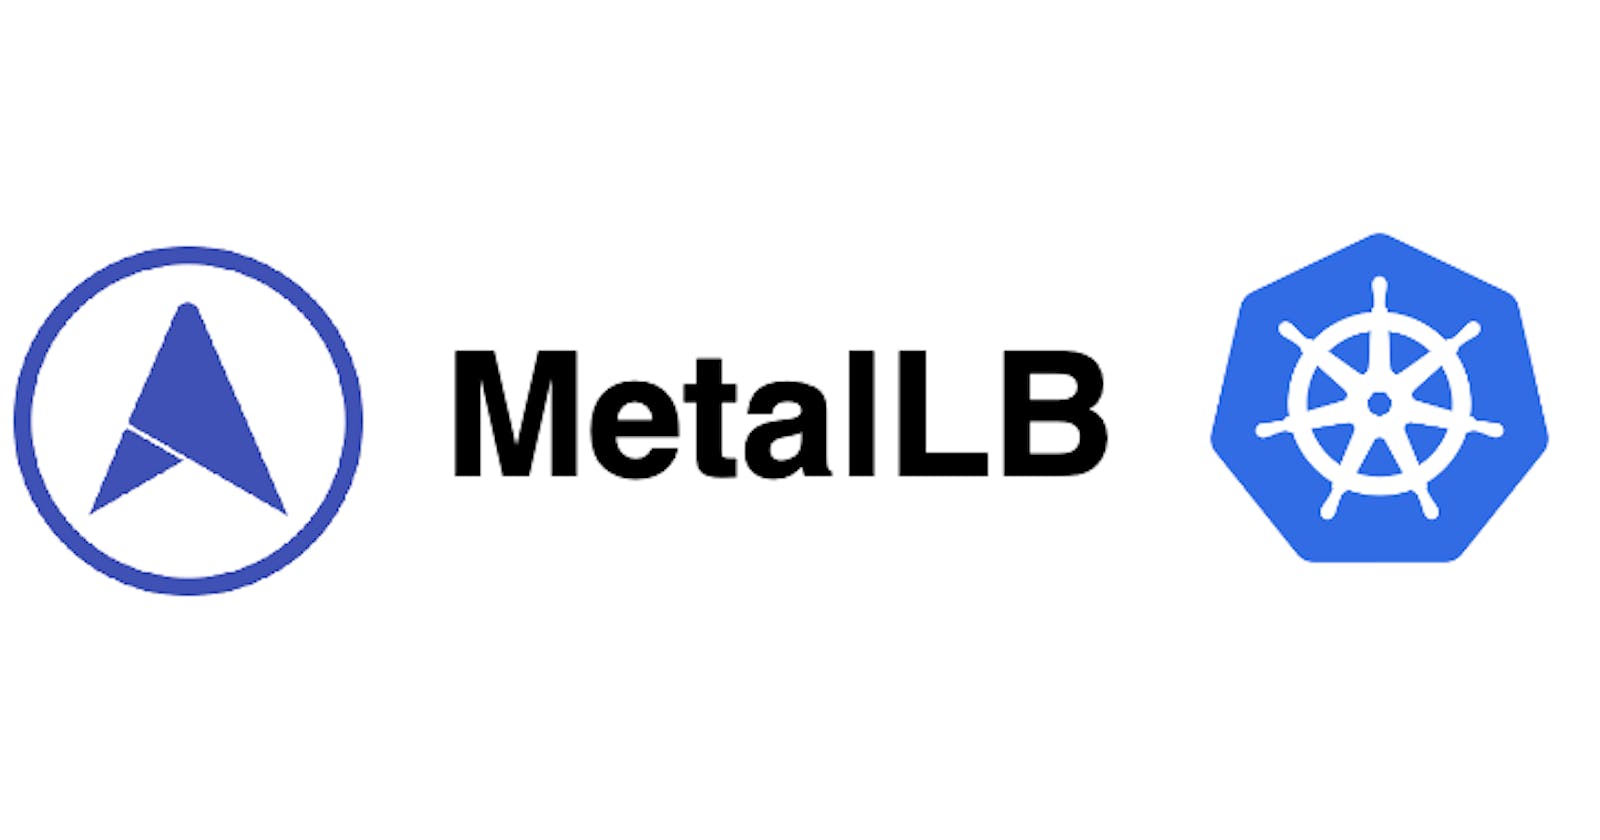 Provision a Network Load Balancer on Kubernetes with MetalLB